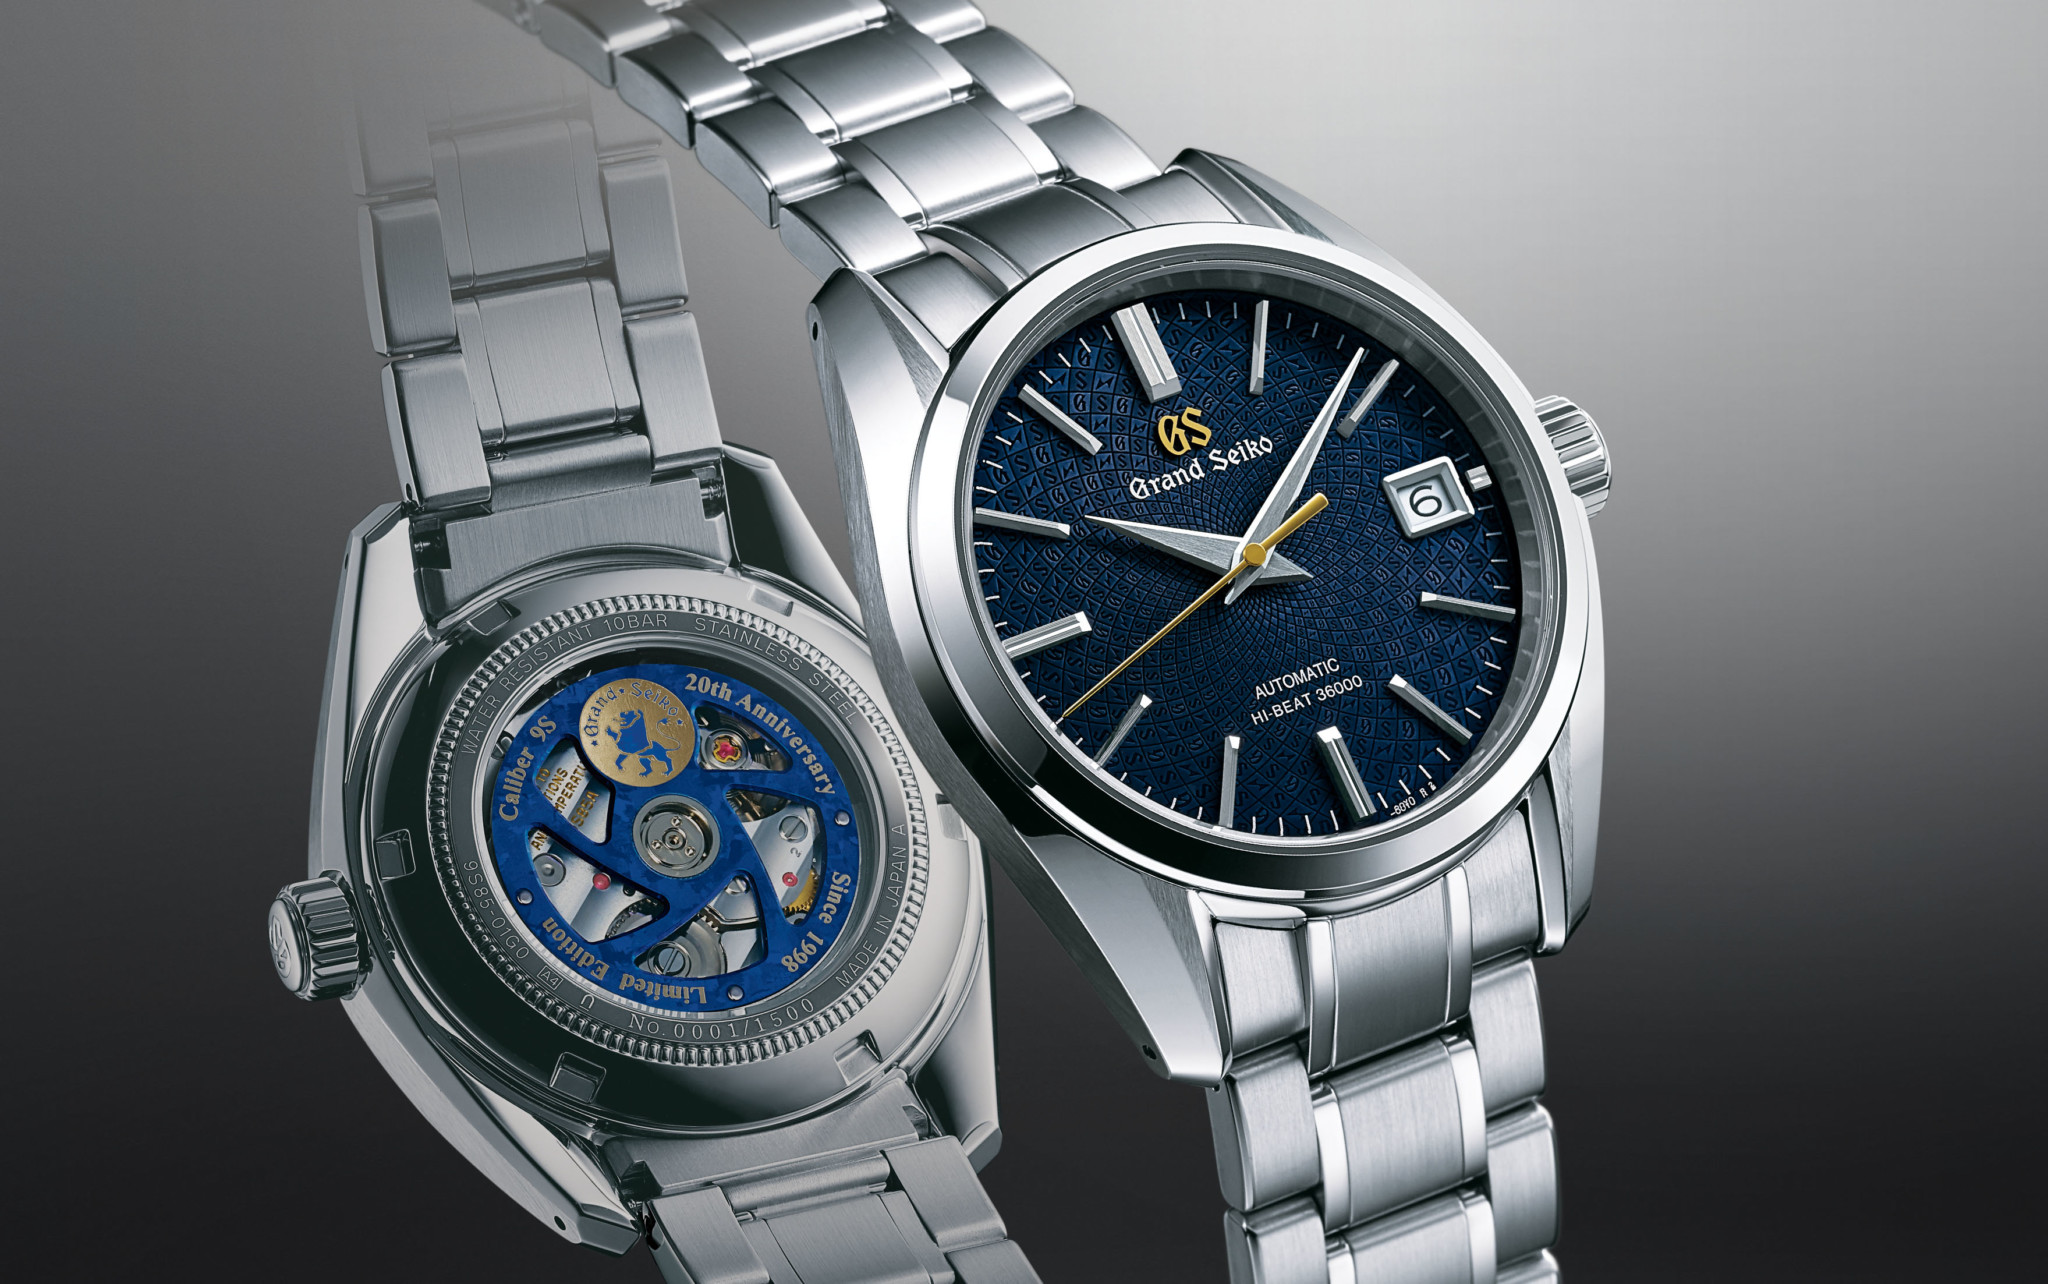 Grand Seiko climbs into the top 10 bestsellers in its price category, says  NPD